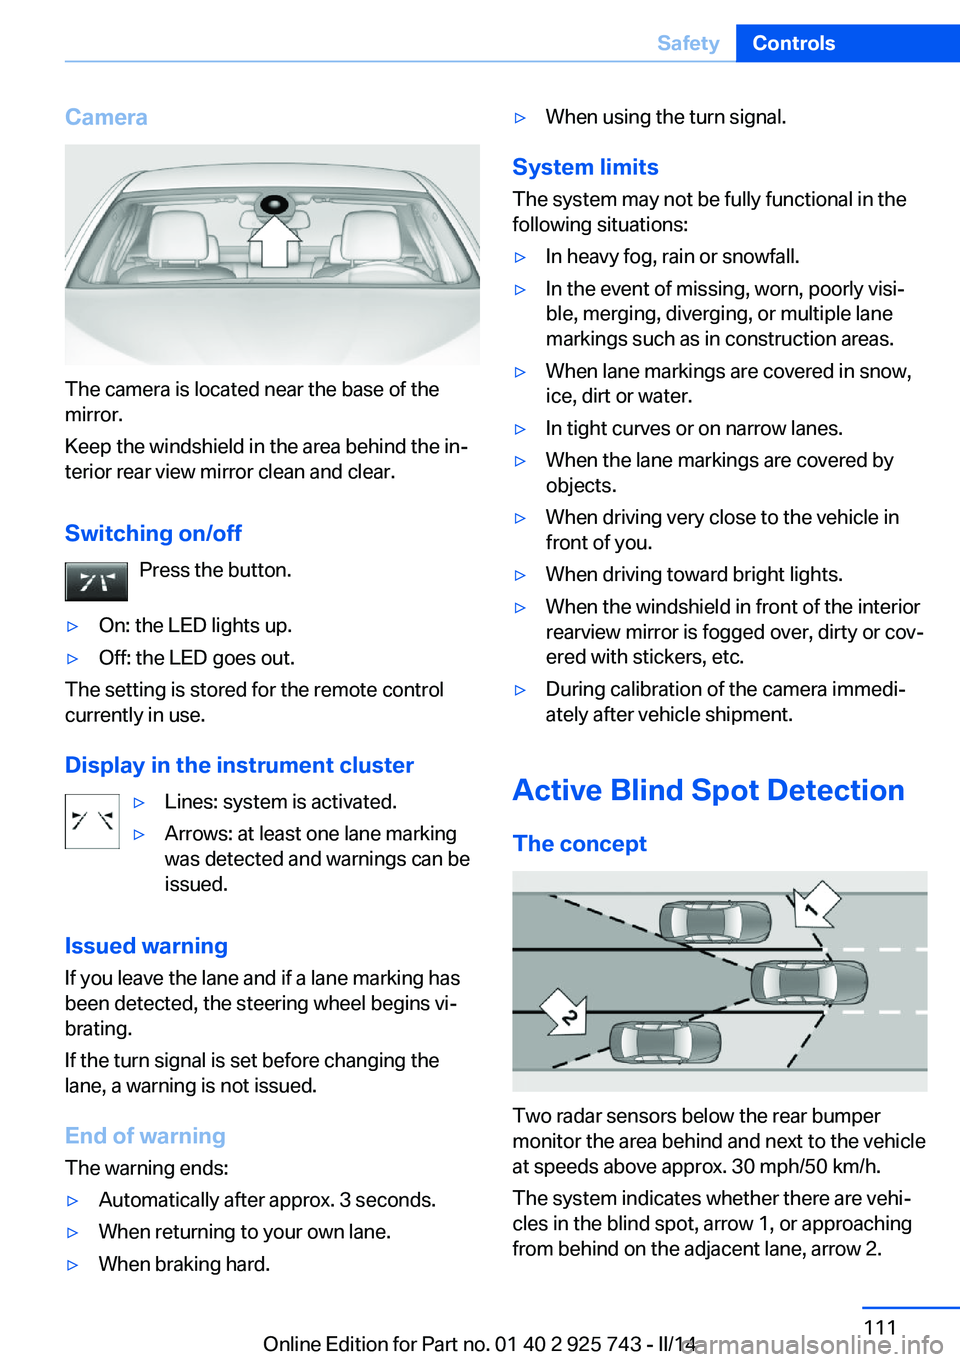 BMW 335I XDRIVE 2014  Owners Manual Camera
The camera is located near the base of the
mirror.
Keep the windshield in the area behind the in‐
terior rear view mirror clean and clear.
Switching on/off Press the button.
▷On: the LED li